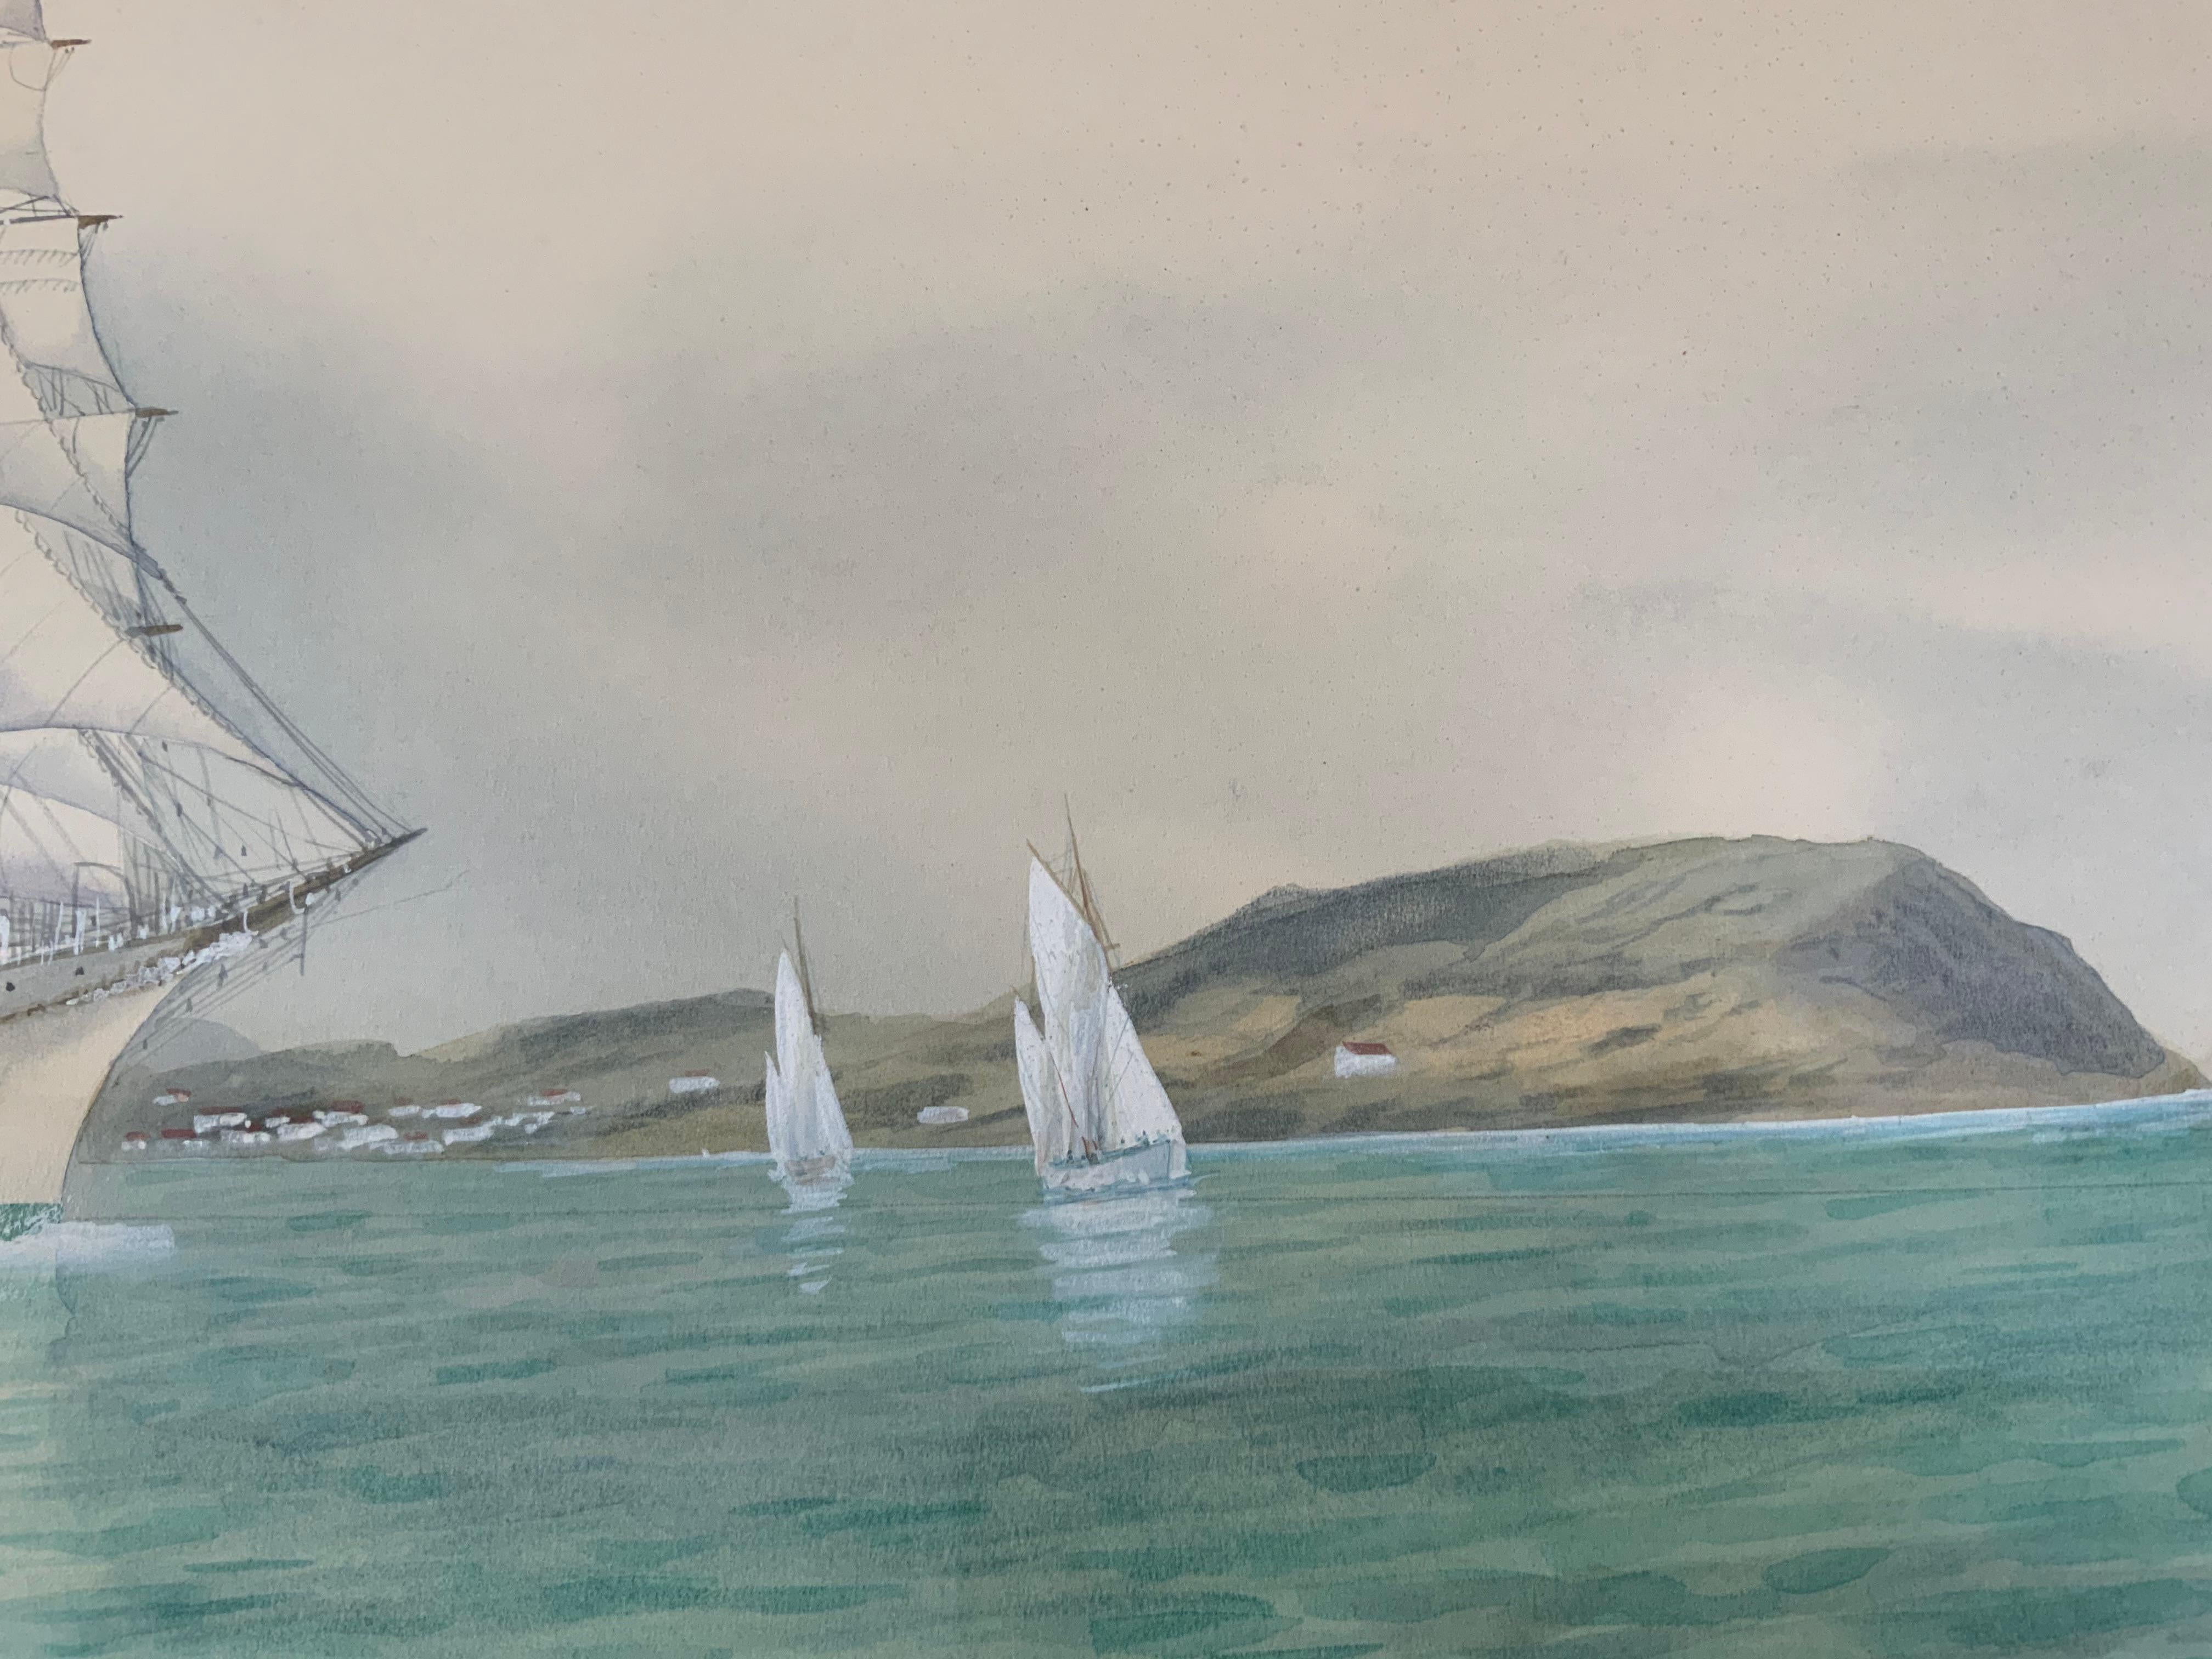 Painting of the Post Yacht Sea Cloud For Sale 1